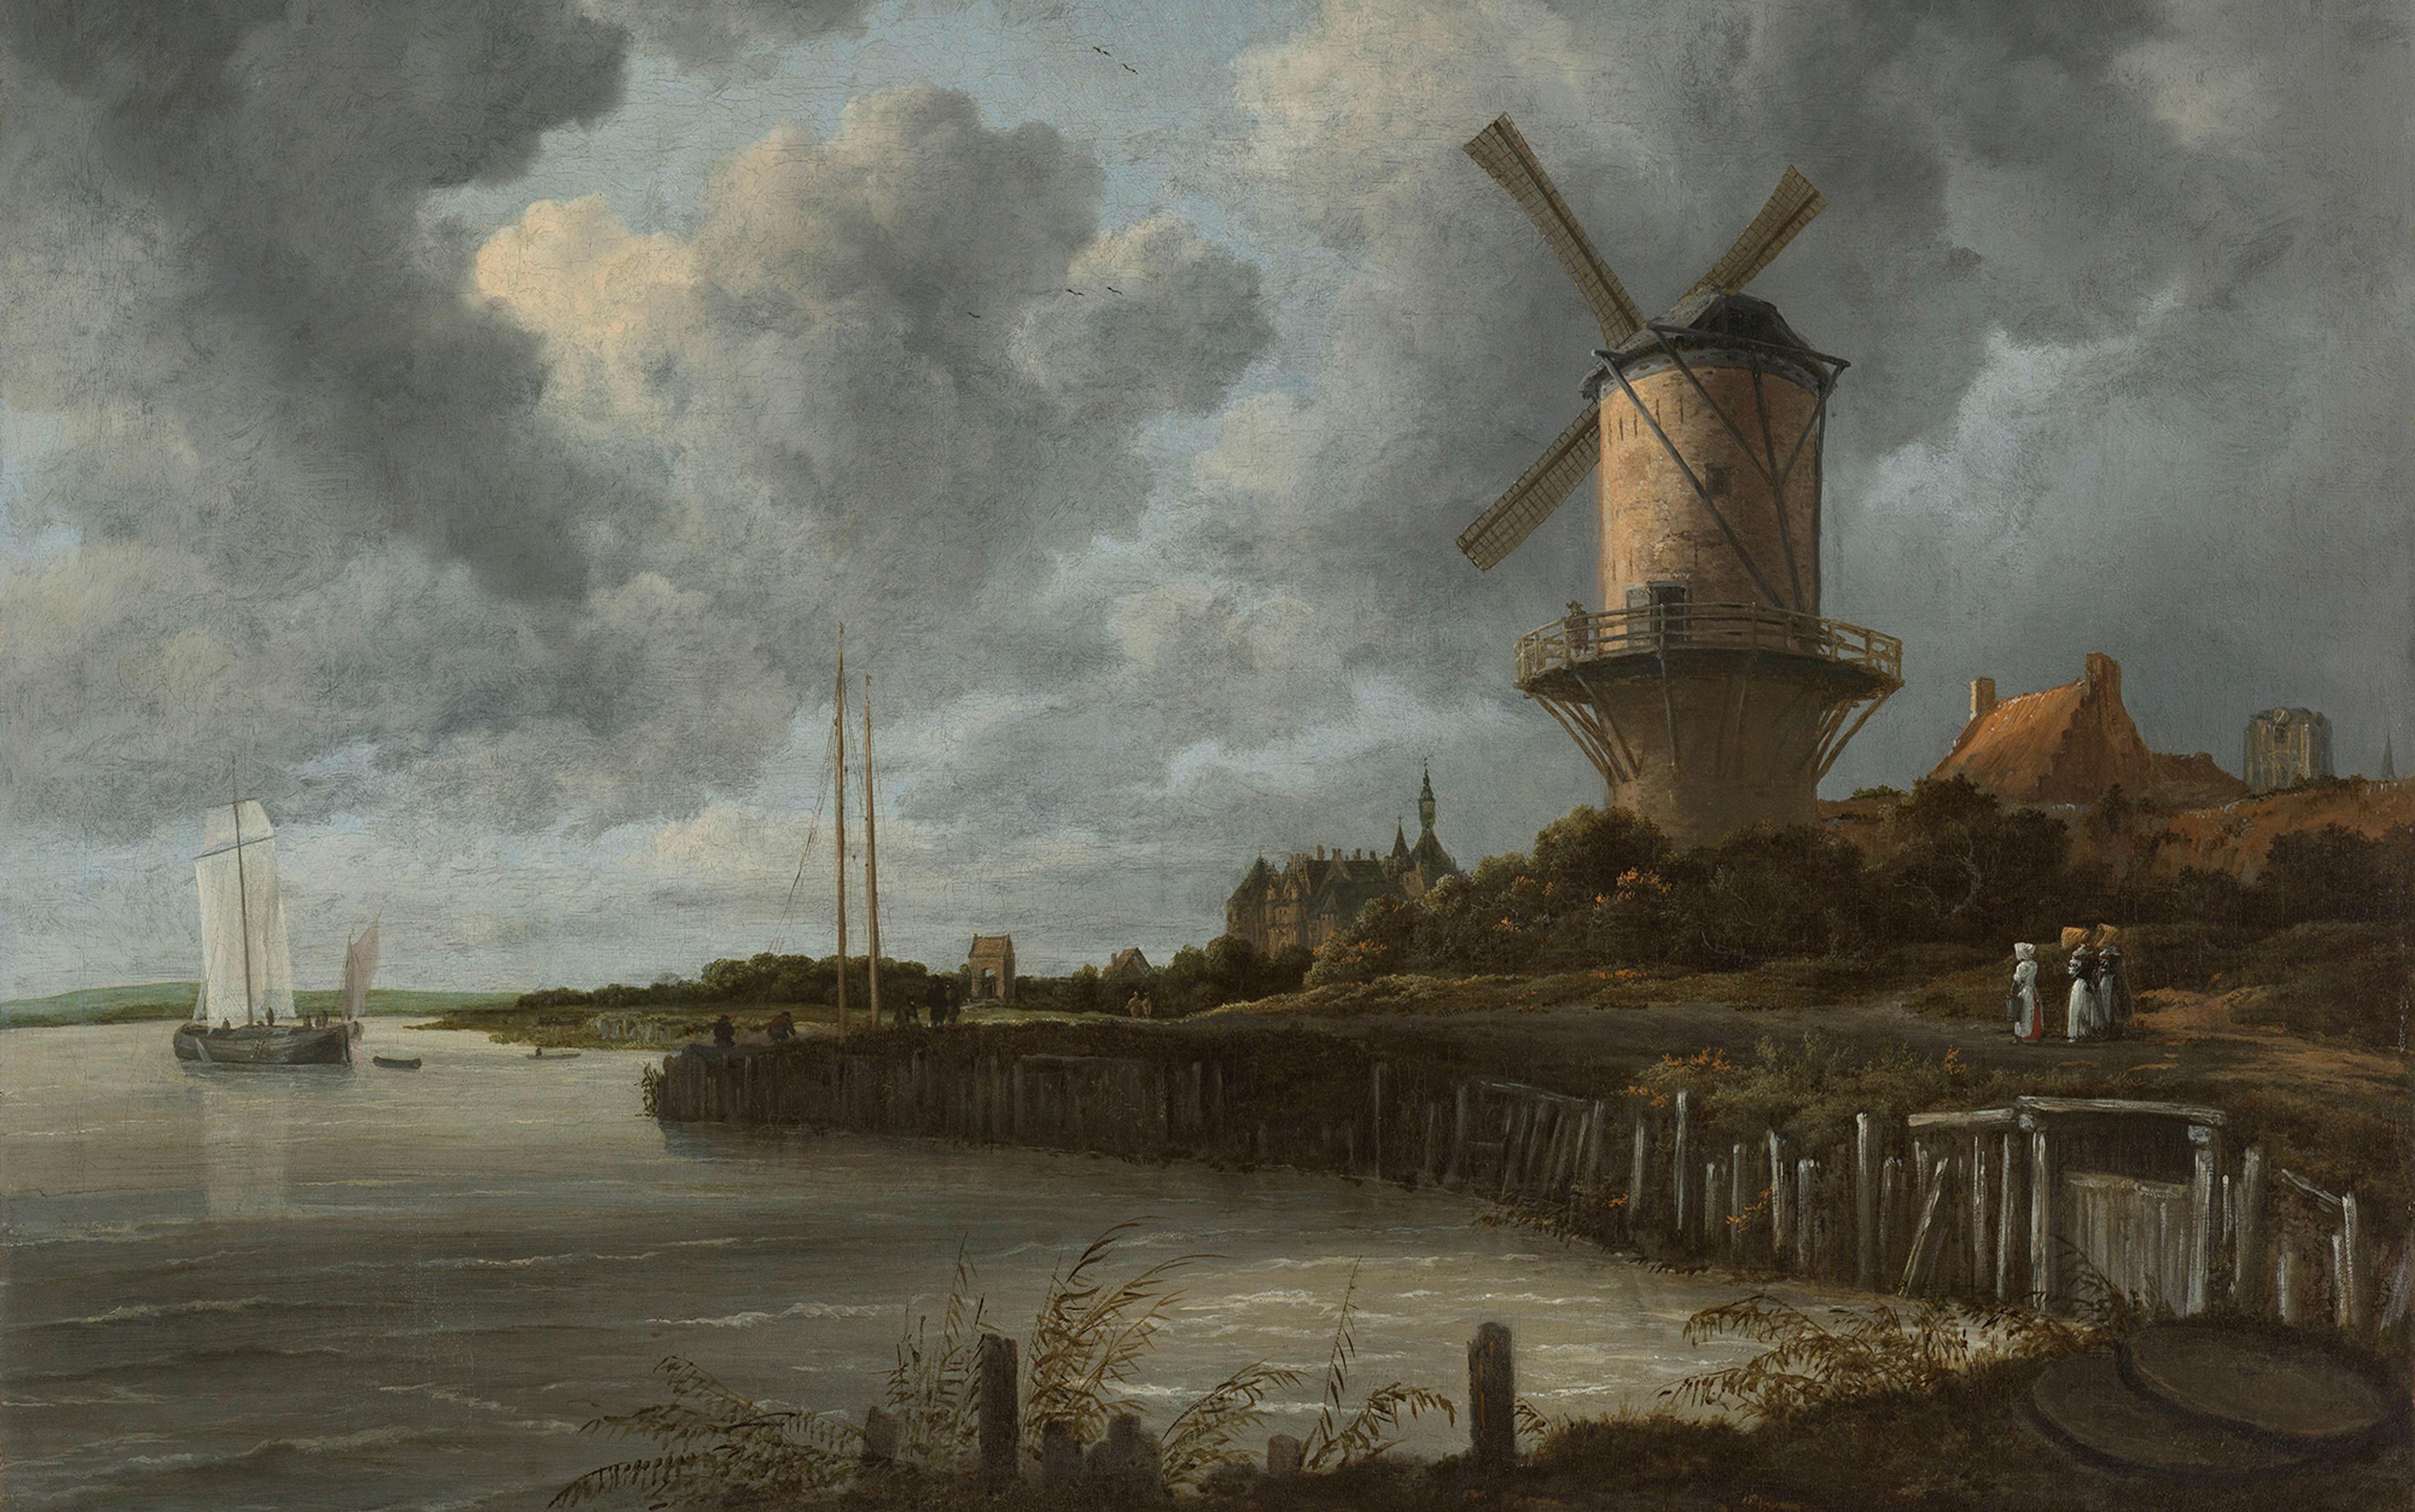 Painting of a riverside scene with a large windmill, boats on the water, and three women standing on the bank next to a dock, under cloudy sky.